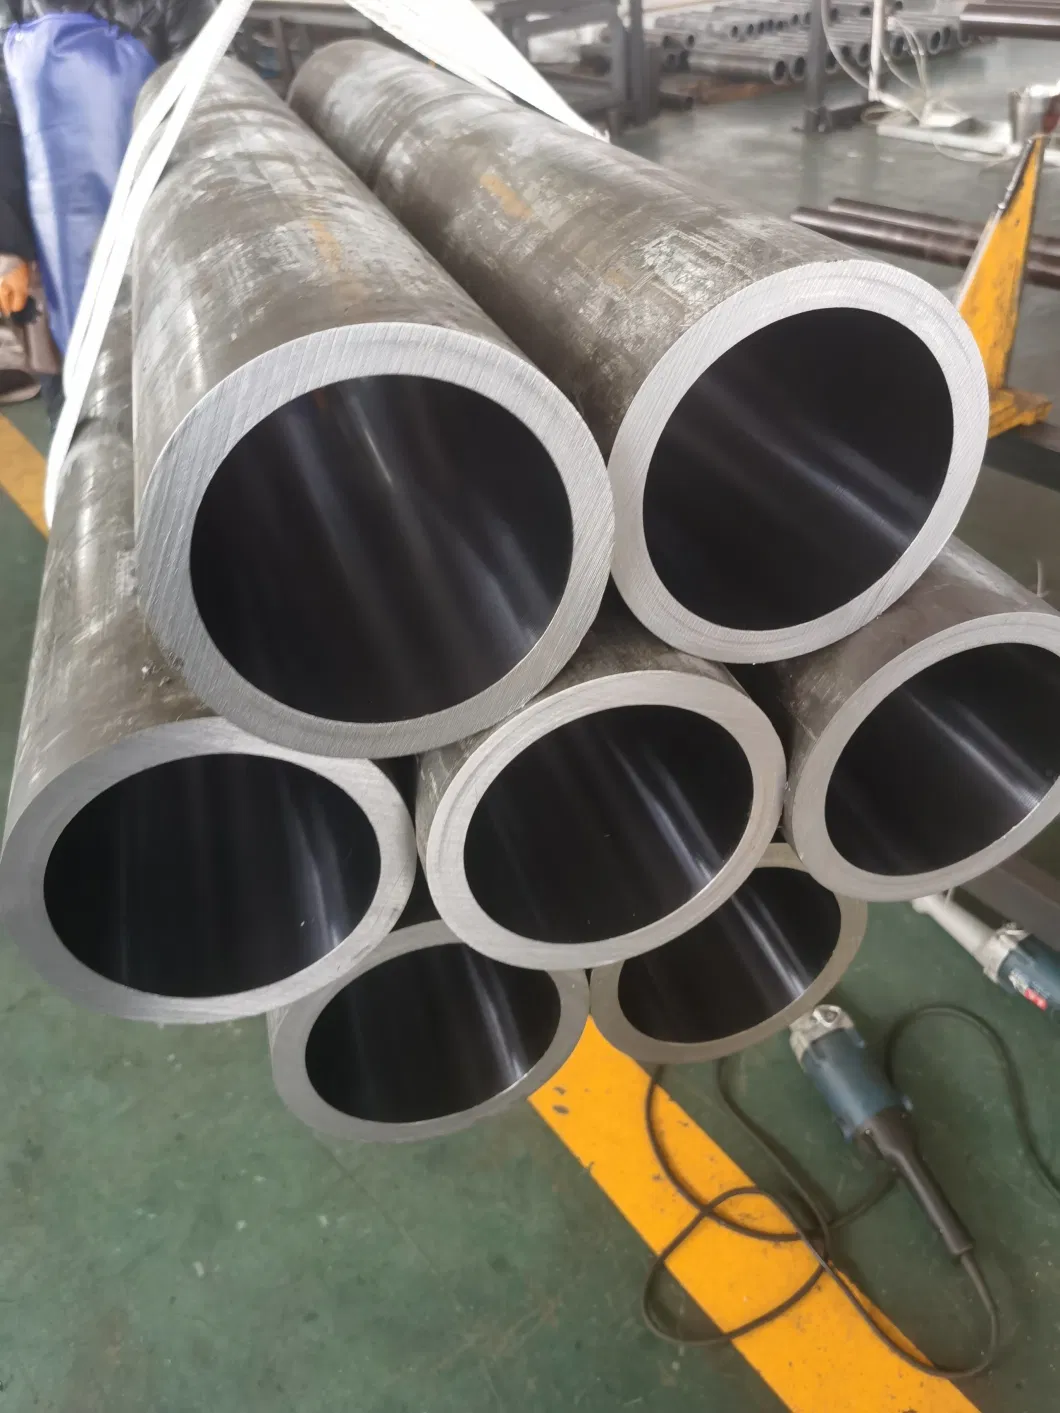 ASTM DIN Standard Cold Rolled Cold Drawn Precise Seamless Steel Pipe Manufacturer Cold Rolled Seamless Steel Tube Factory Price Seamless Steel Pipe